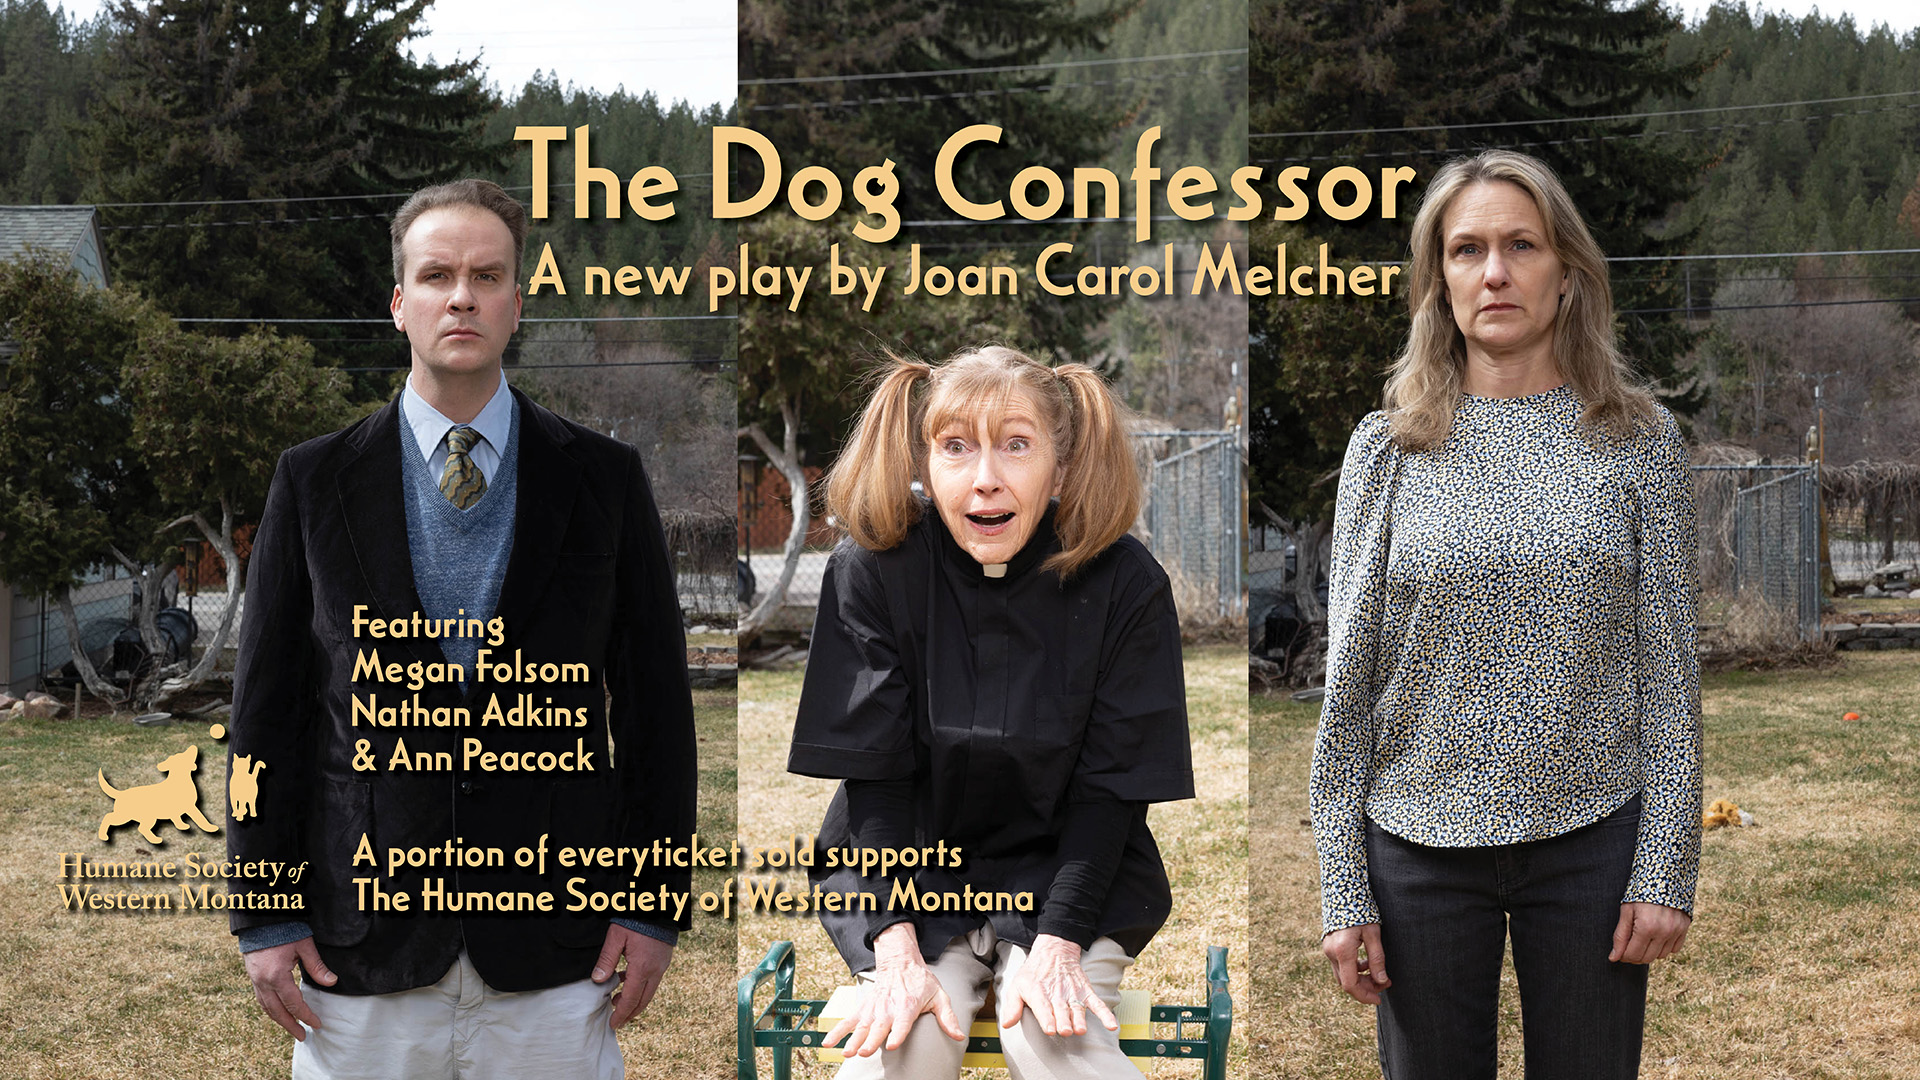 THE DOG CONFESSOR, A NEW PLAY BY JOAN CAROL MELCHER